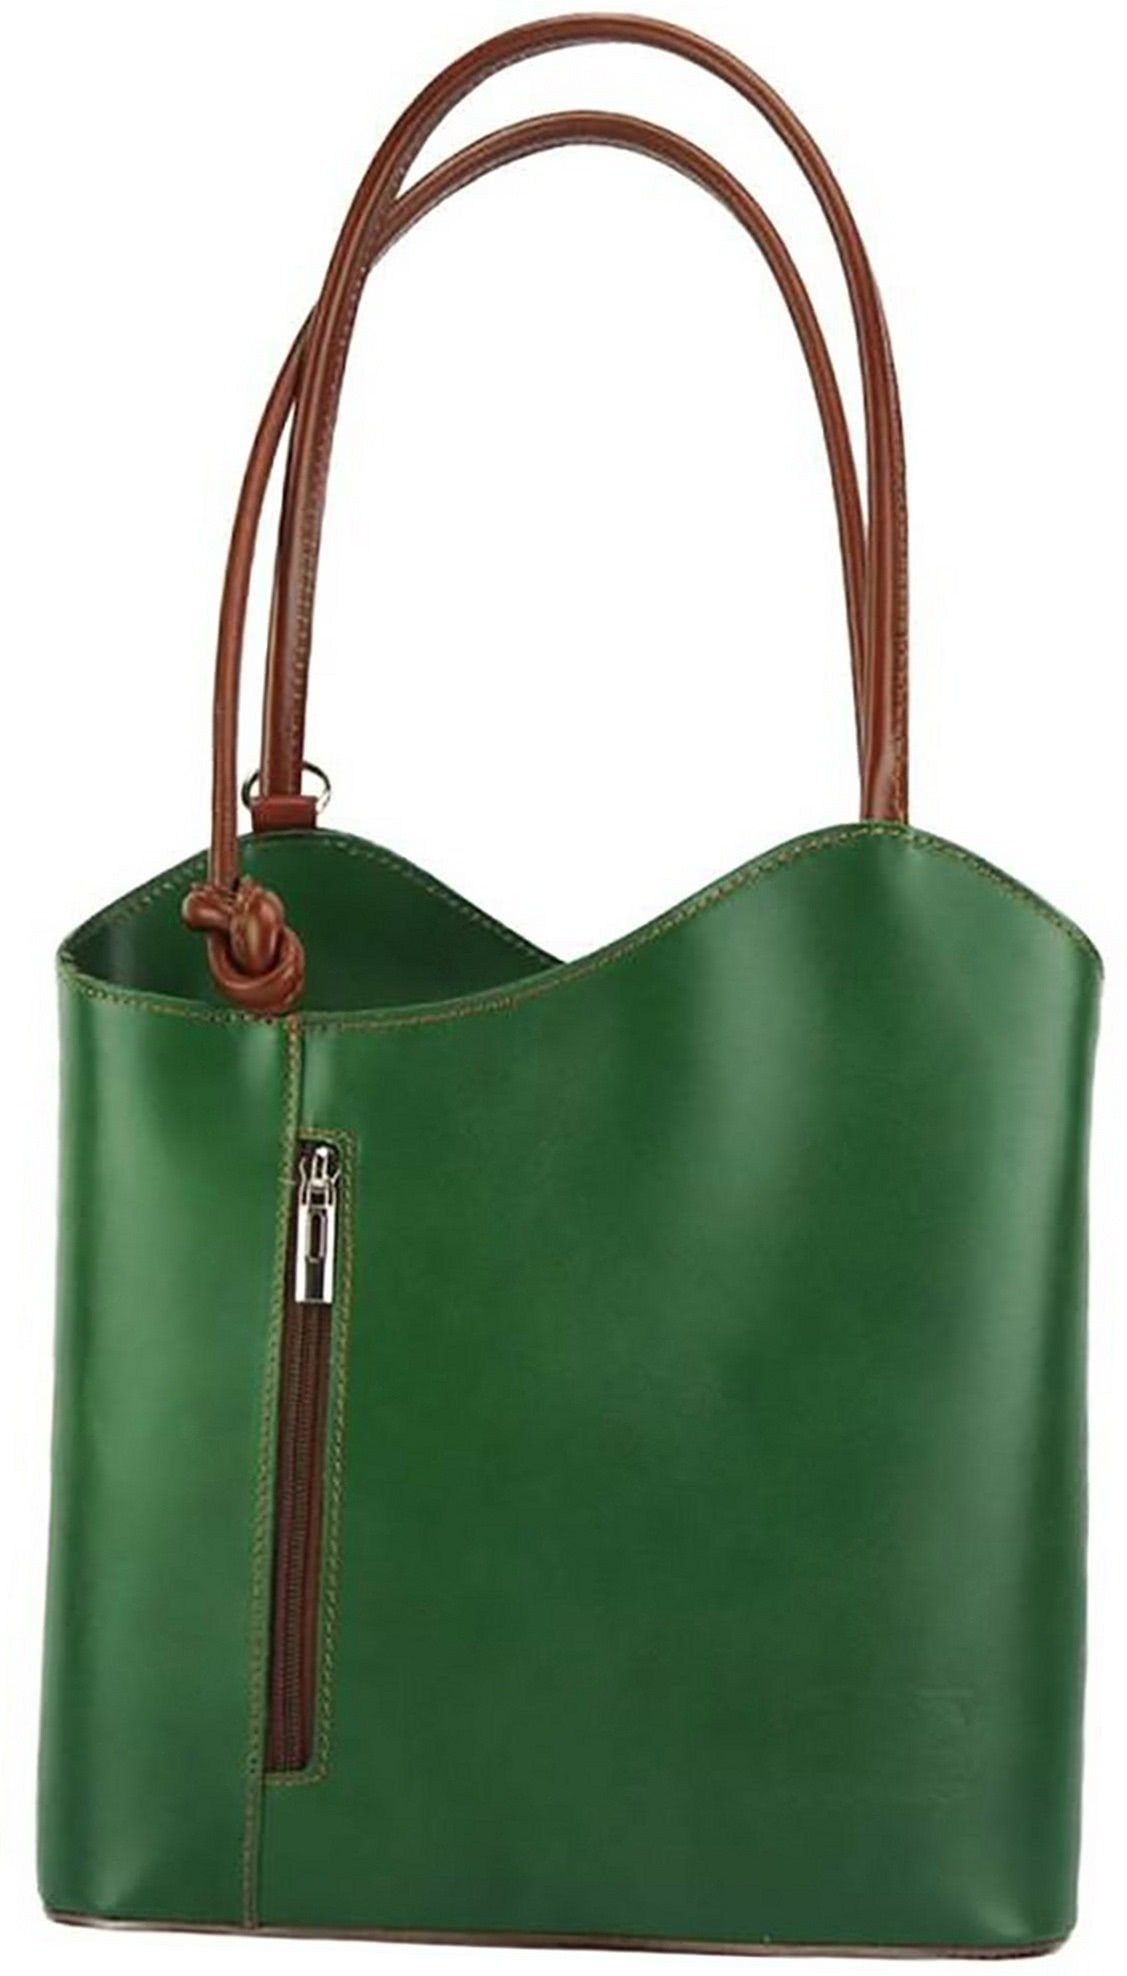 FLORENCE Schultertasche Florence 2in1 Echtleder Damen Handtasche, Damen  Tasche Echtleder grün, braun, Made-In Italy